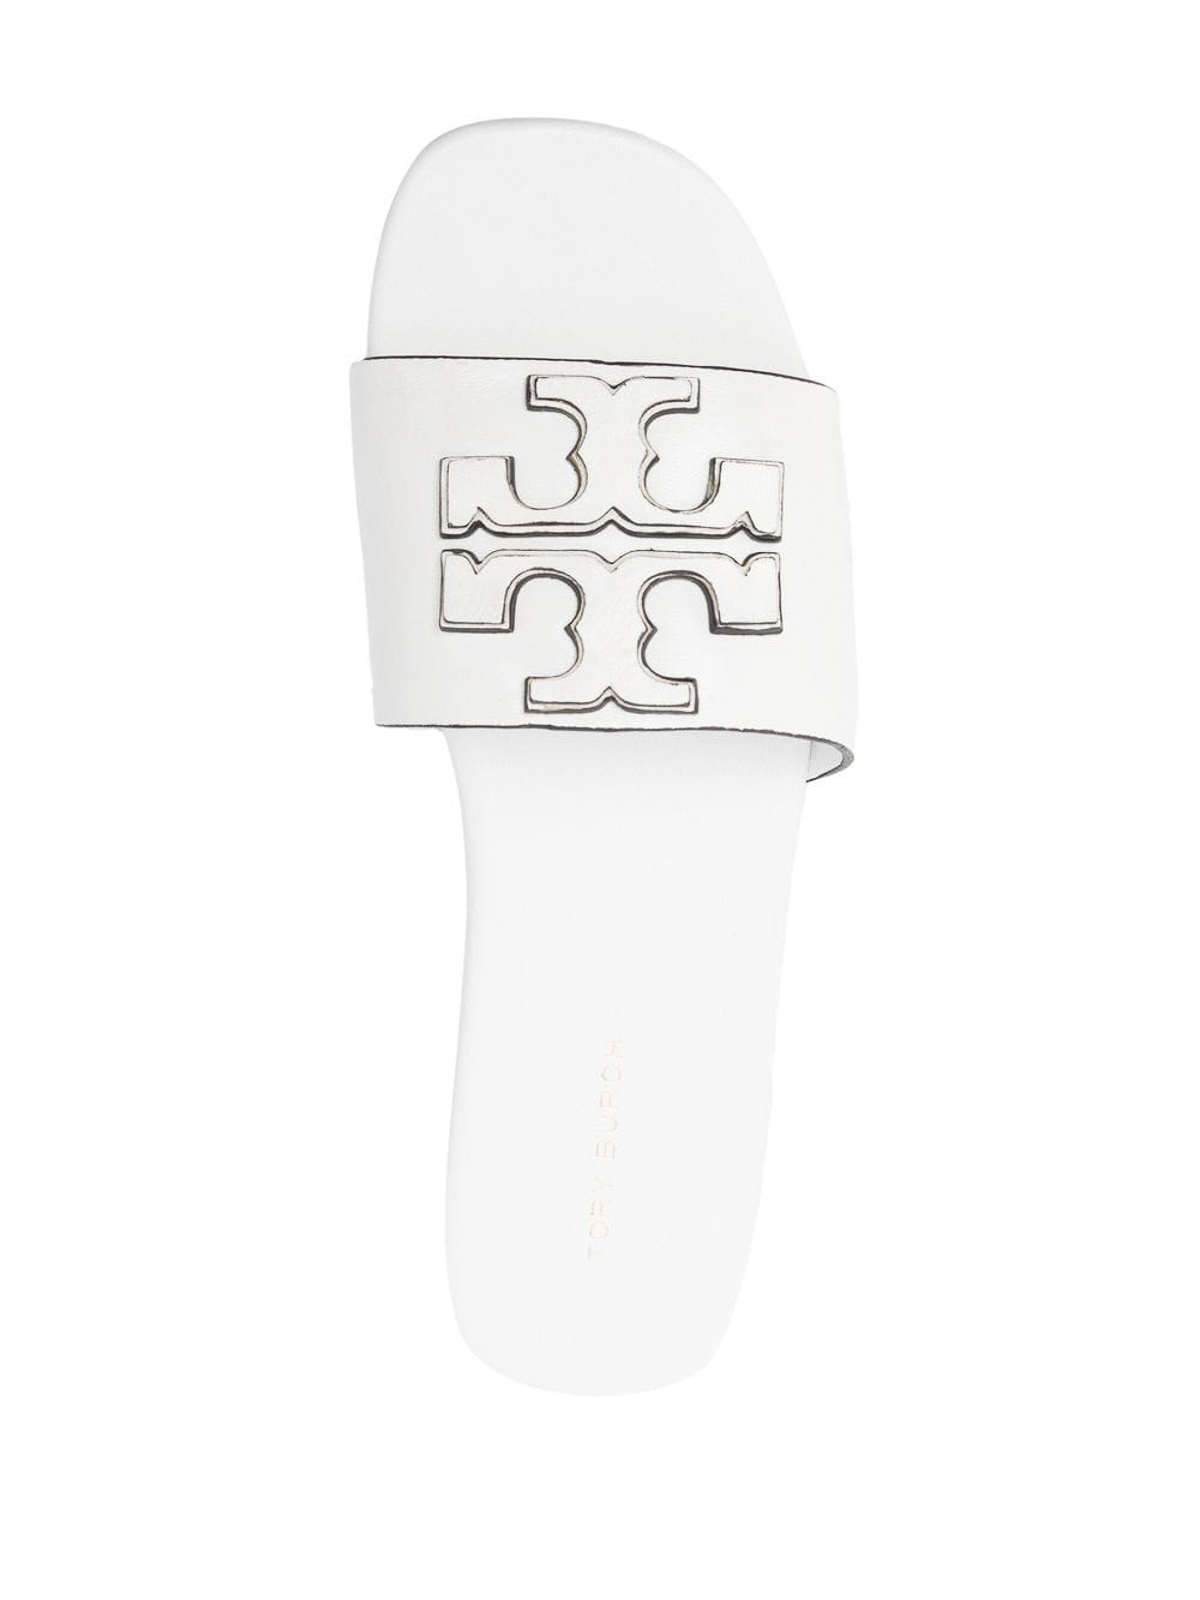 Shop Tory Burch Eleanor Leather Flat Sandals In White